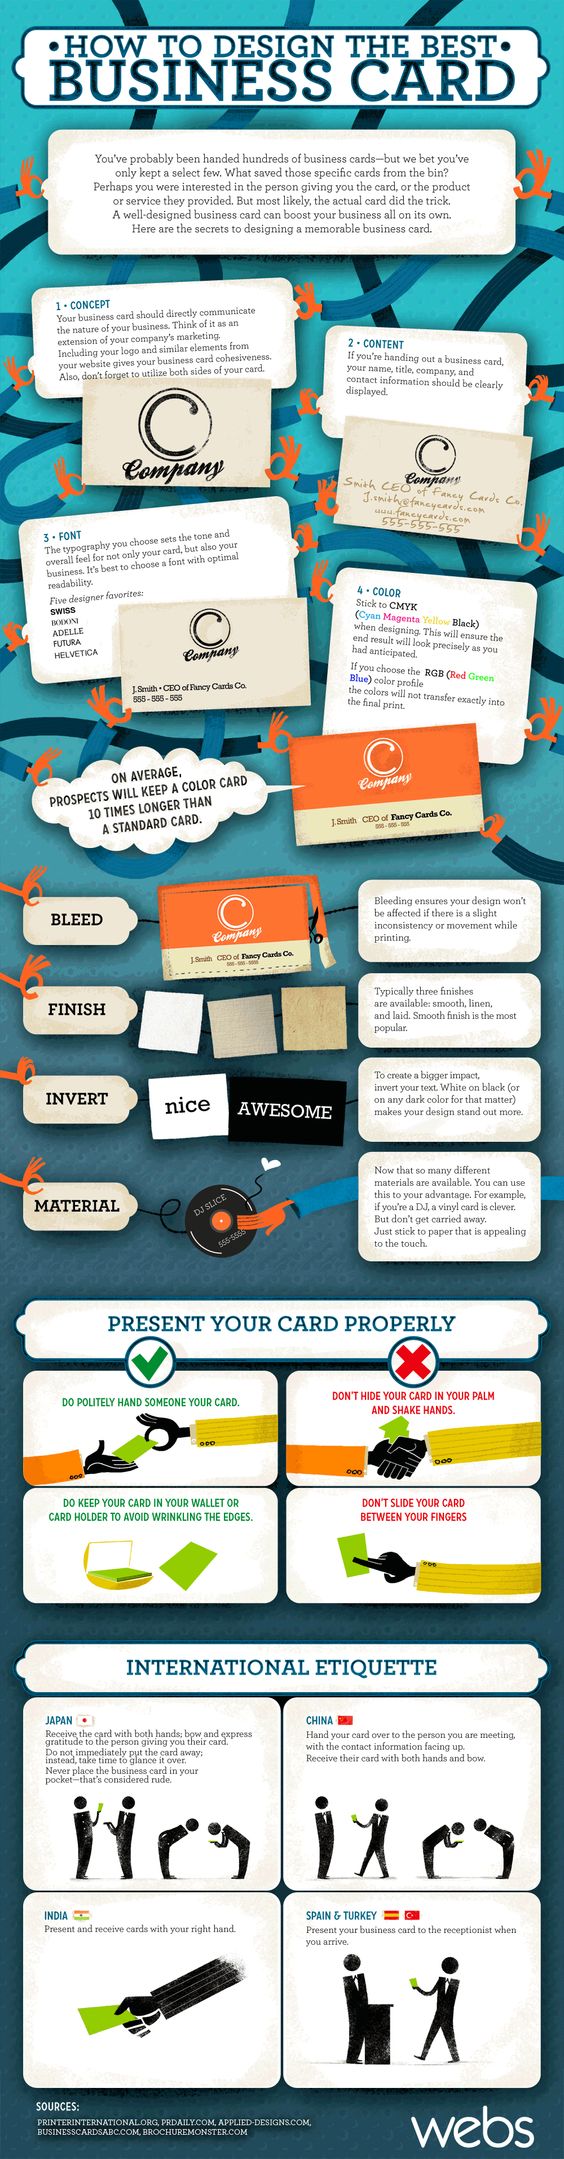 How to design the best business card #infographic #infografía